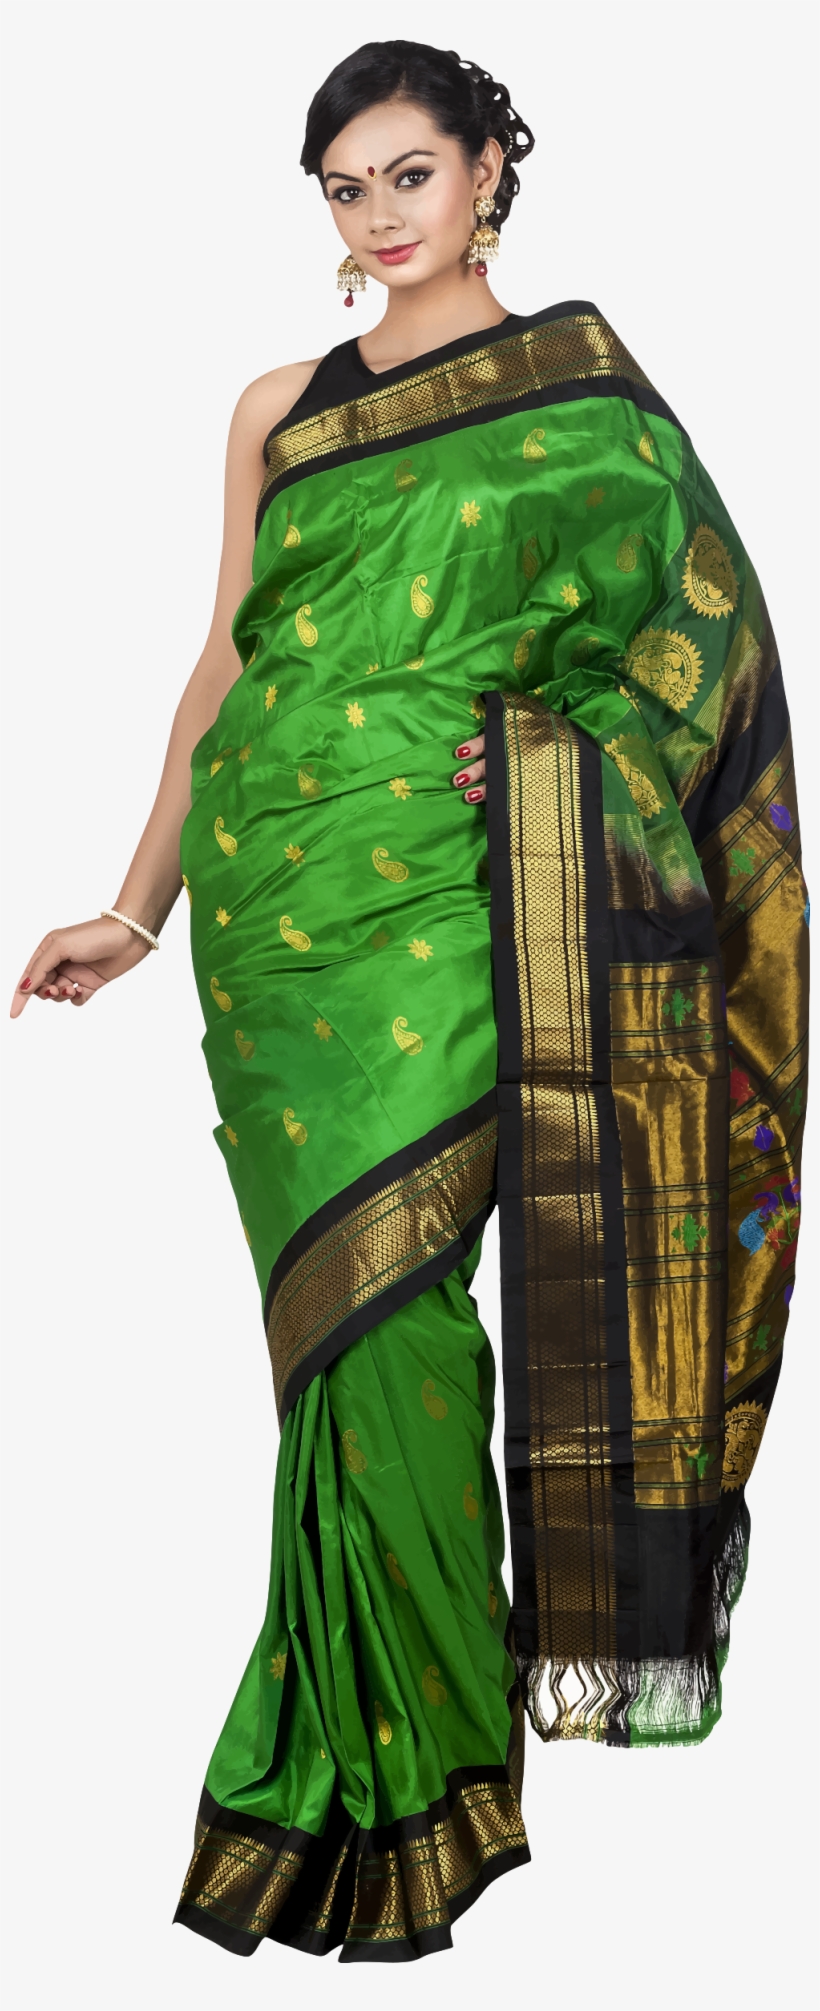 This Free Icons Png Design Of Woman In Saree, transparent png #2447773